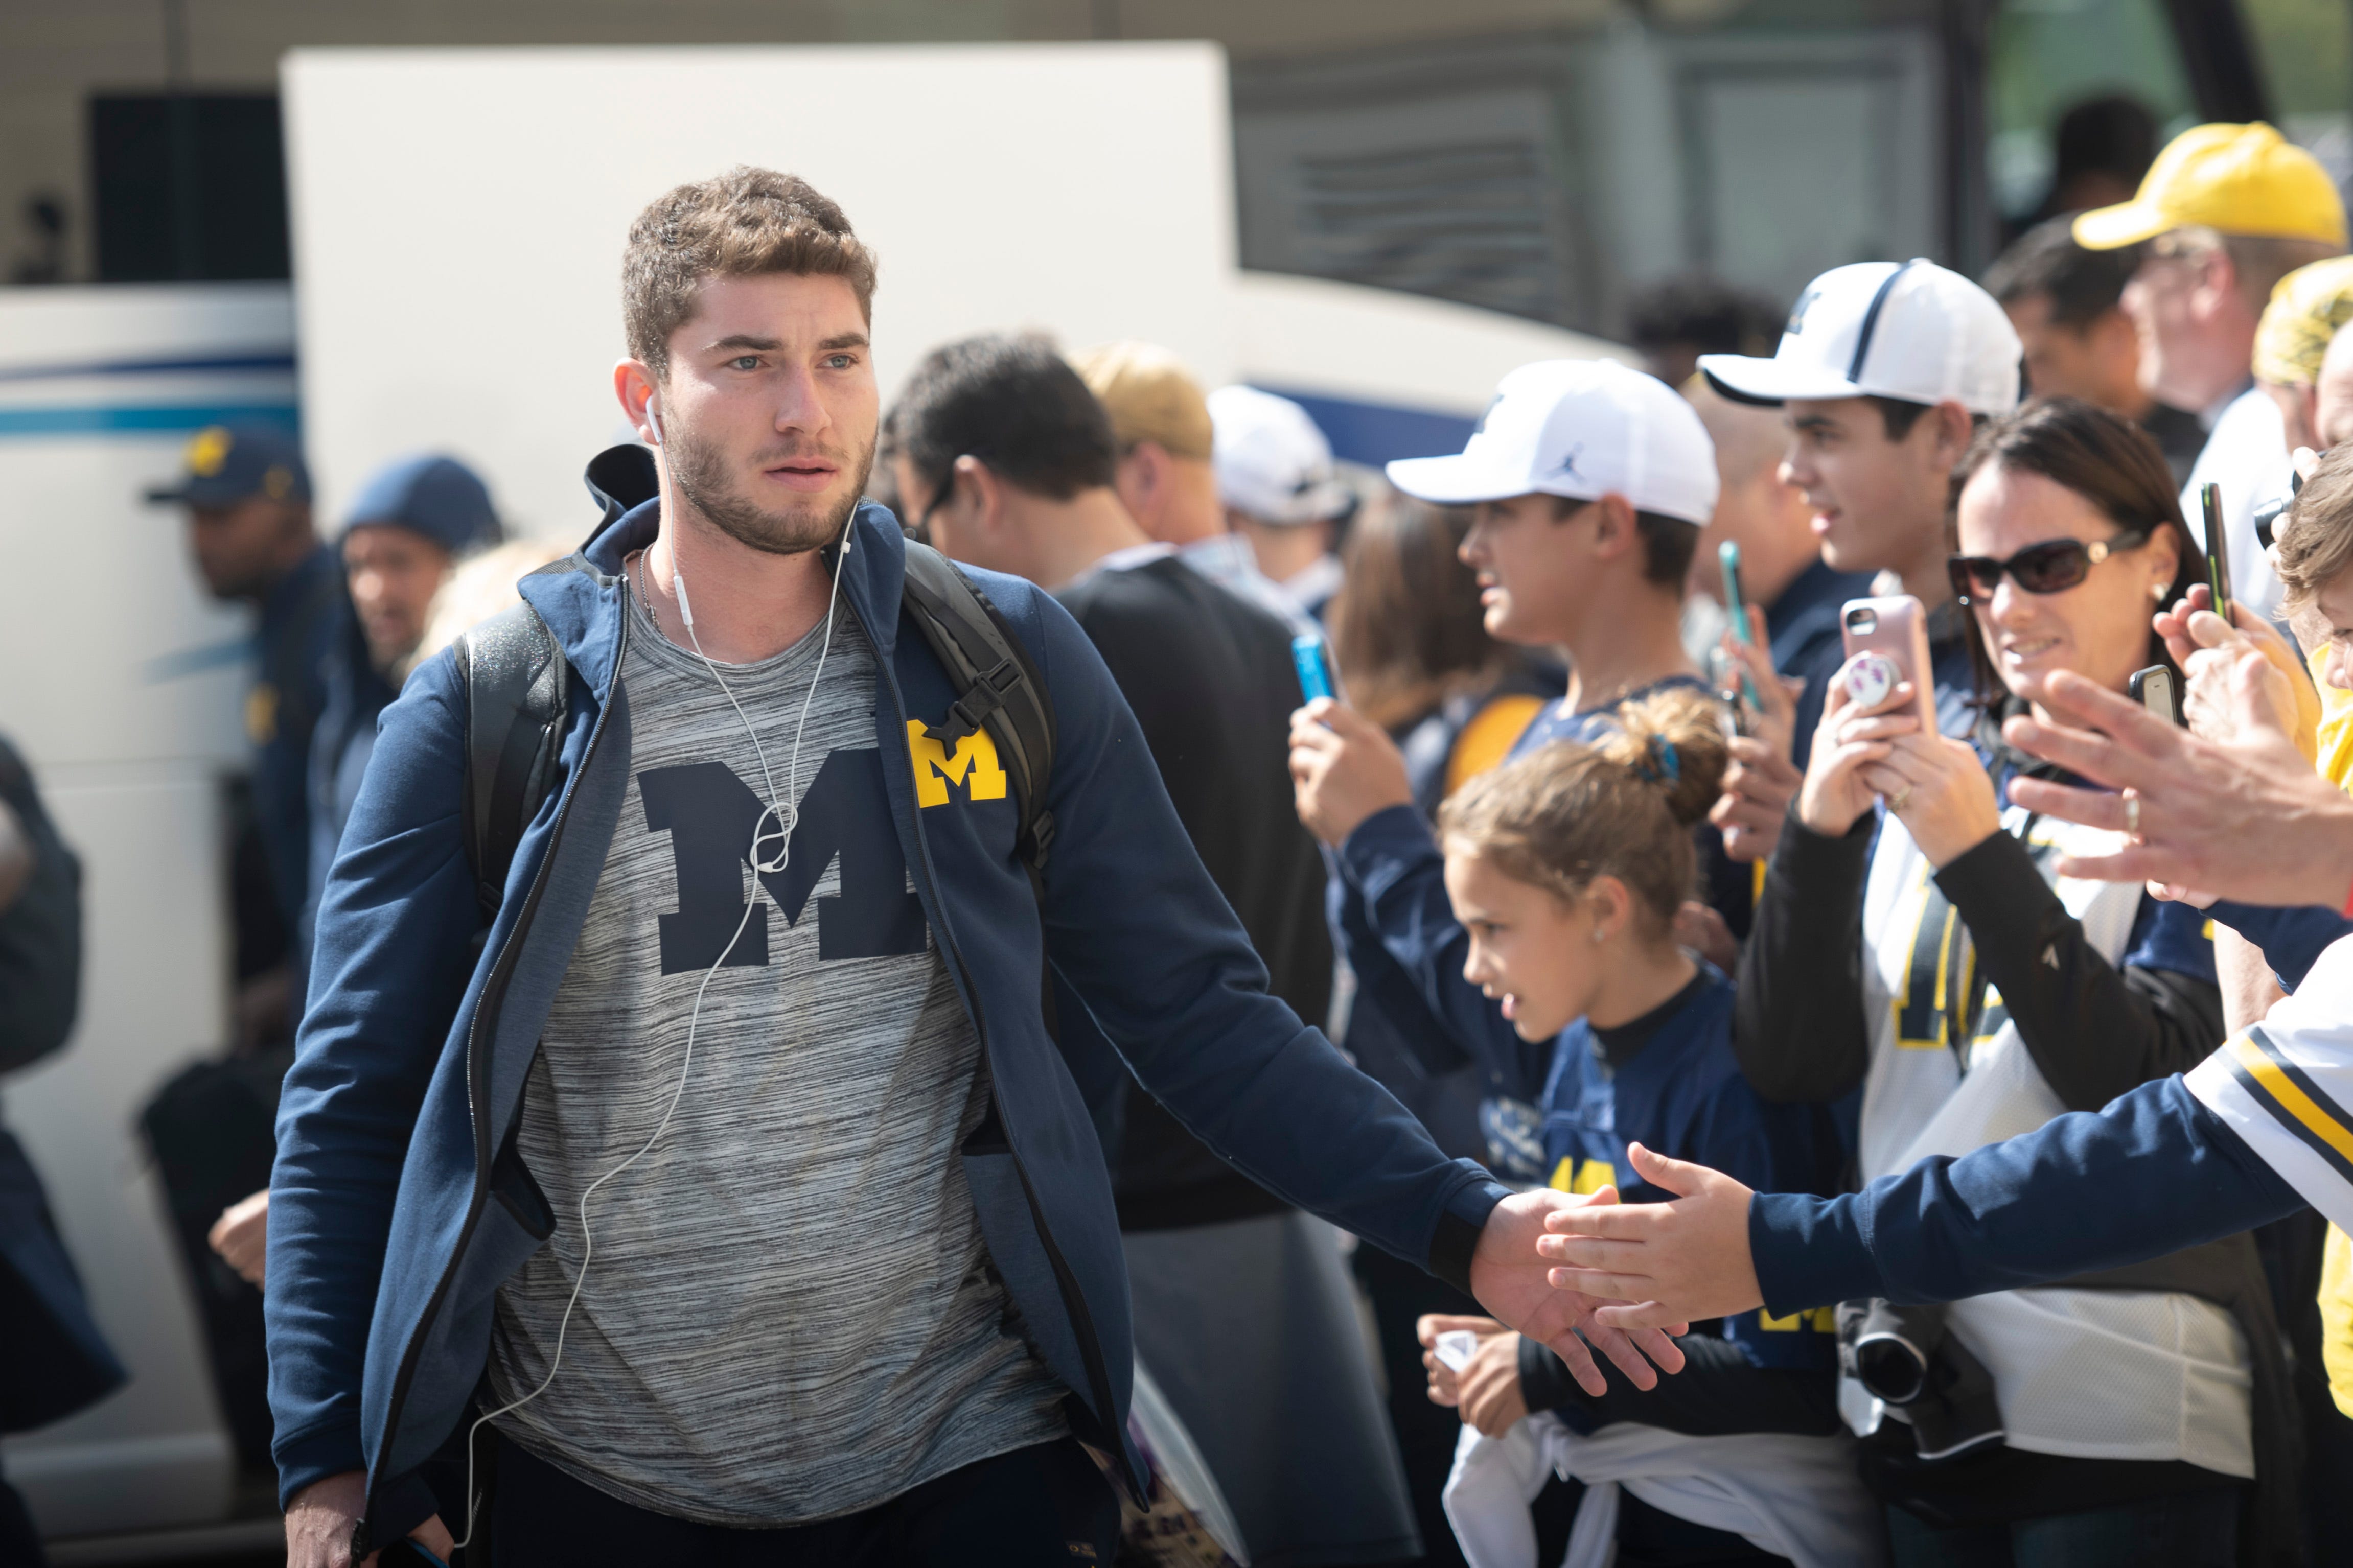 Michigan quarterback Shea Patterson arrives at Ryan Field with the team before the game against Northwestern.